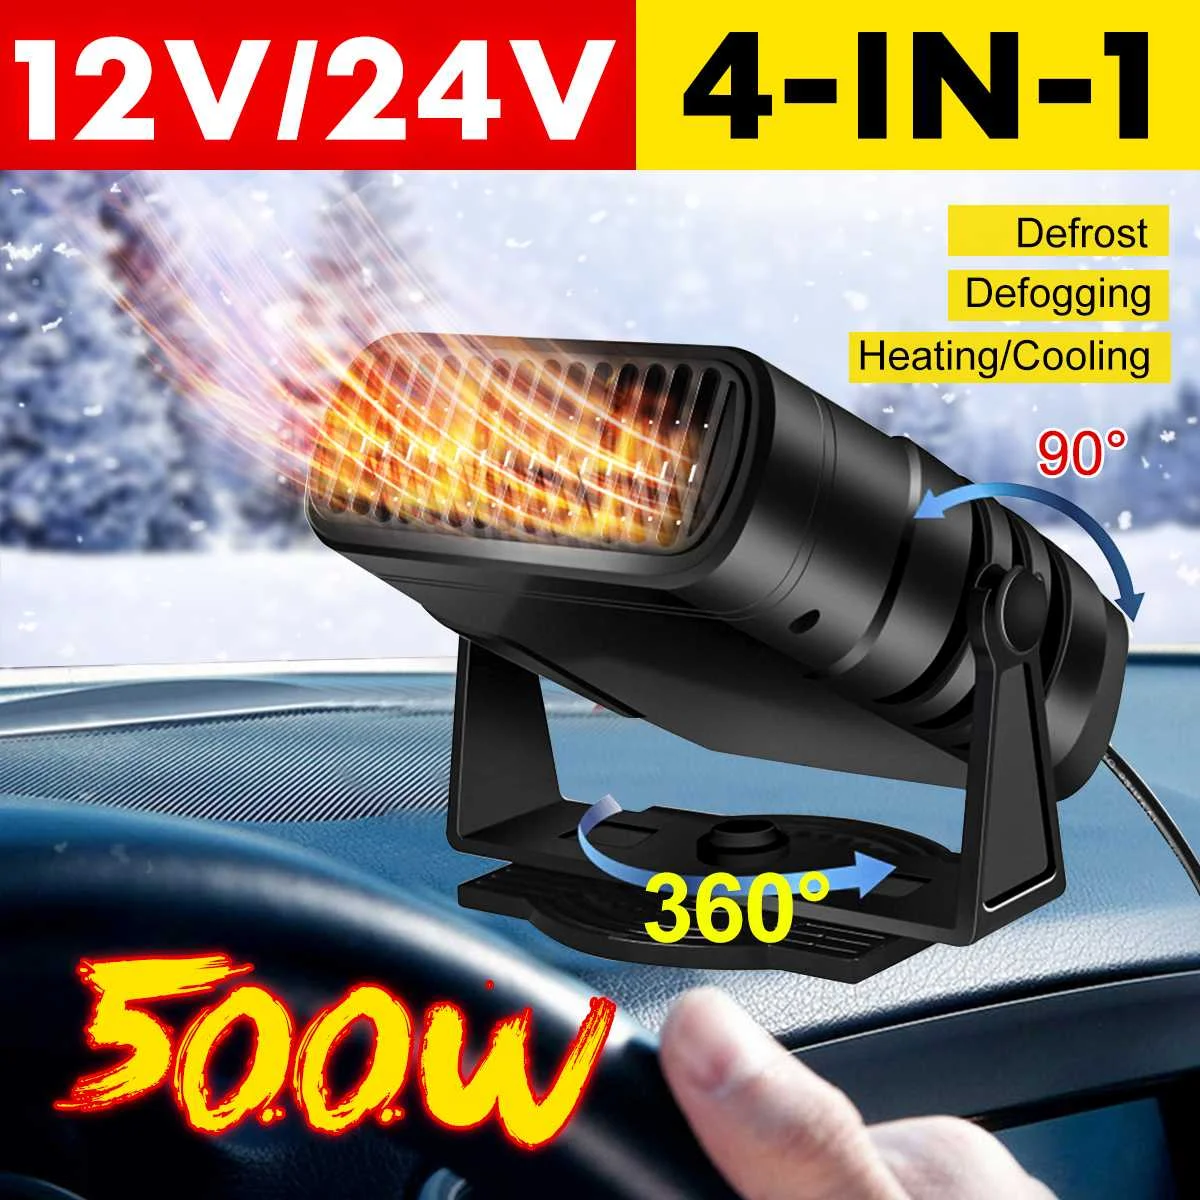 Plug in Car Heater, 12V 120W Heating & Cooling Car Heater, 2 in 1 Portable  Car Heater Defroster, Mini Car Fan Vehicle Electronic Air Heater Defrost